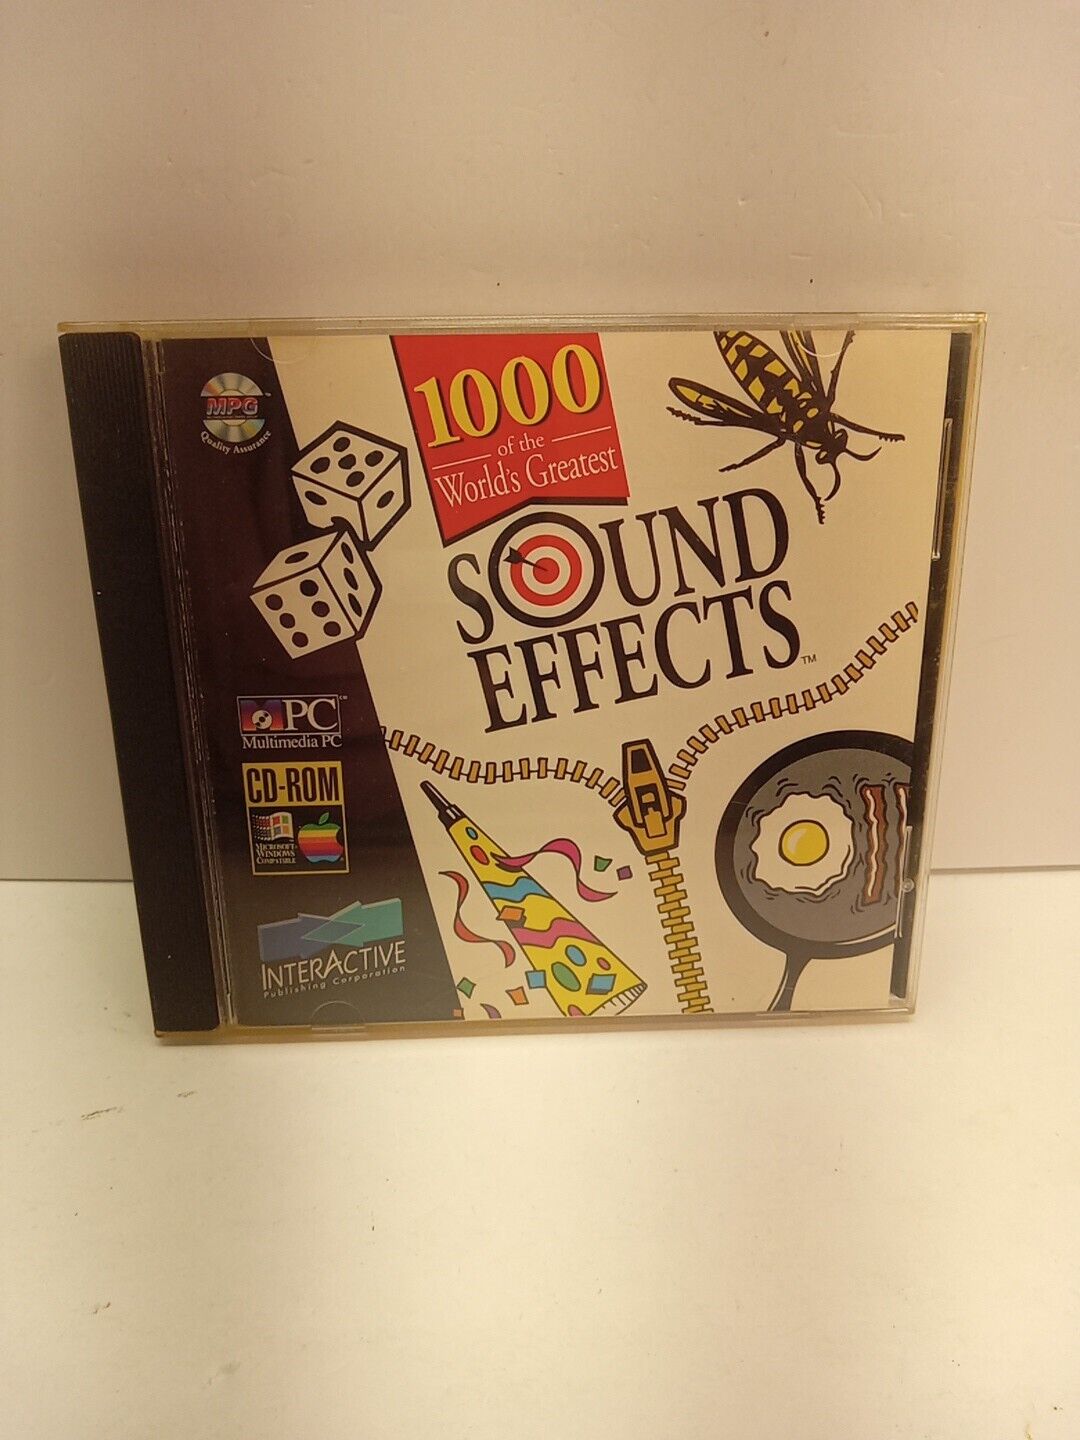 1000 of the World's Greatest Sound Effects (PC CD ROM, 1994, Interactive)